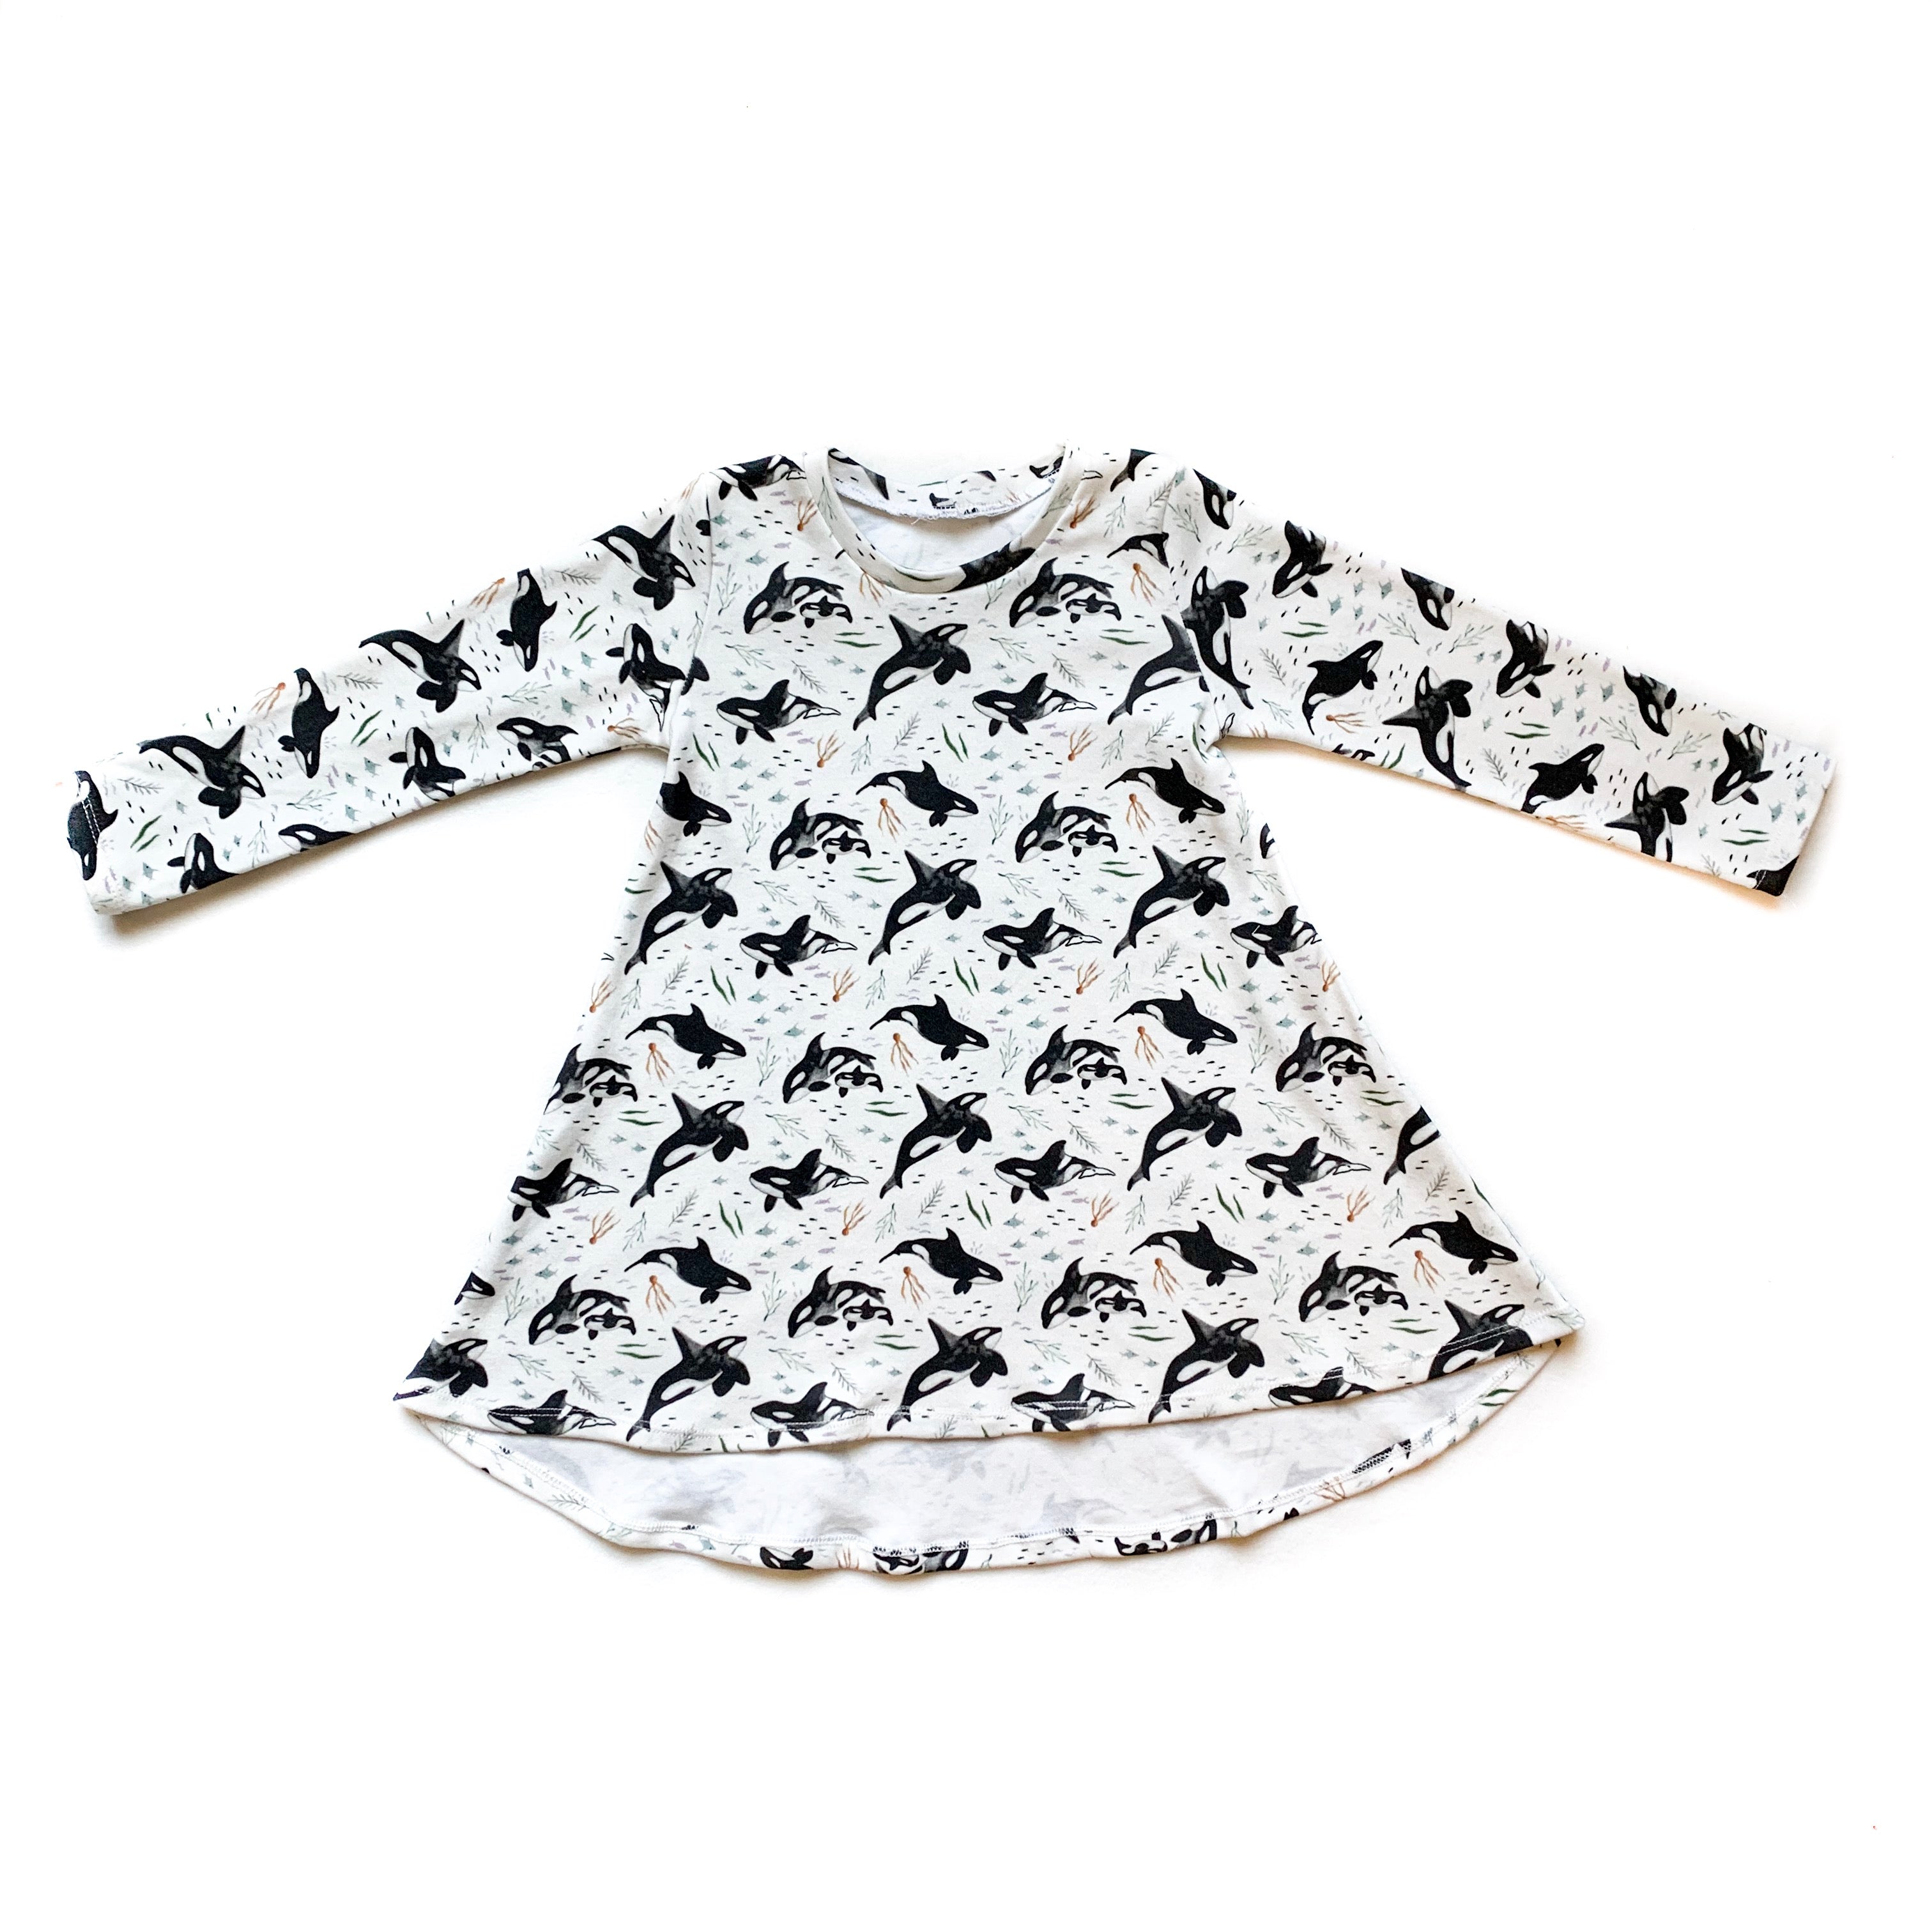 Toddler Orca Whale Long Sleeve Tunic Dress